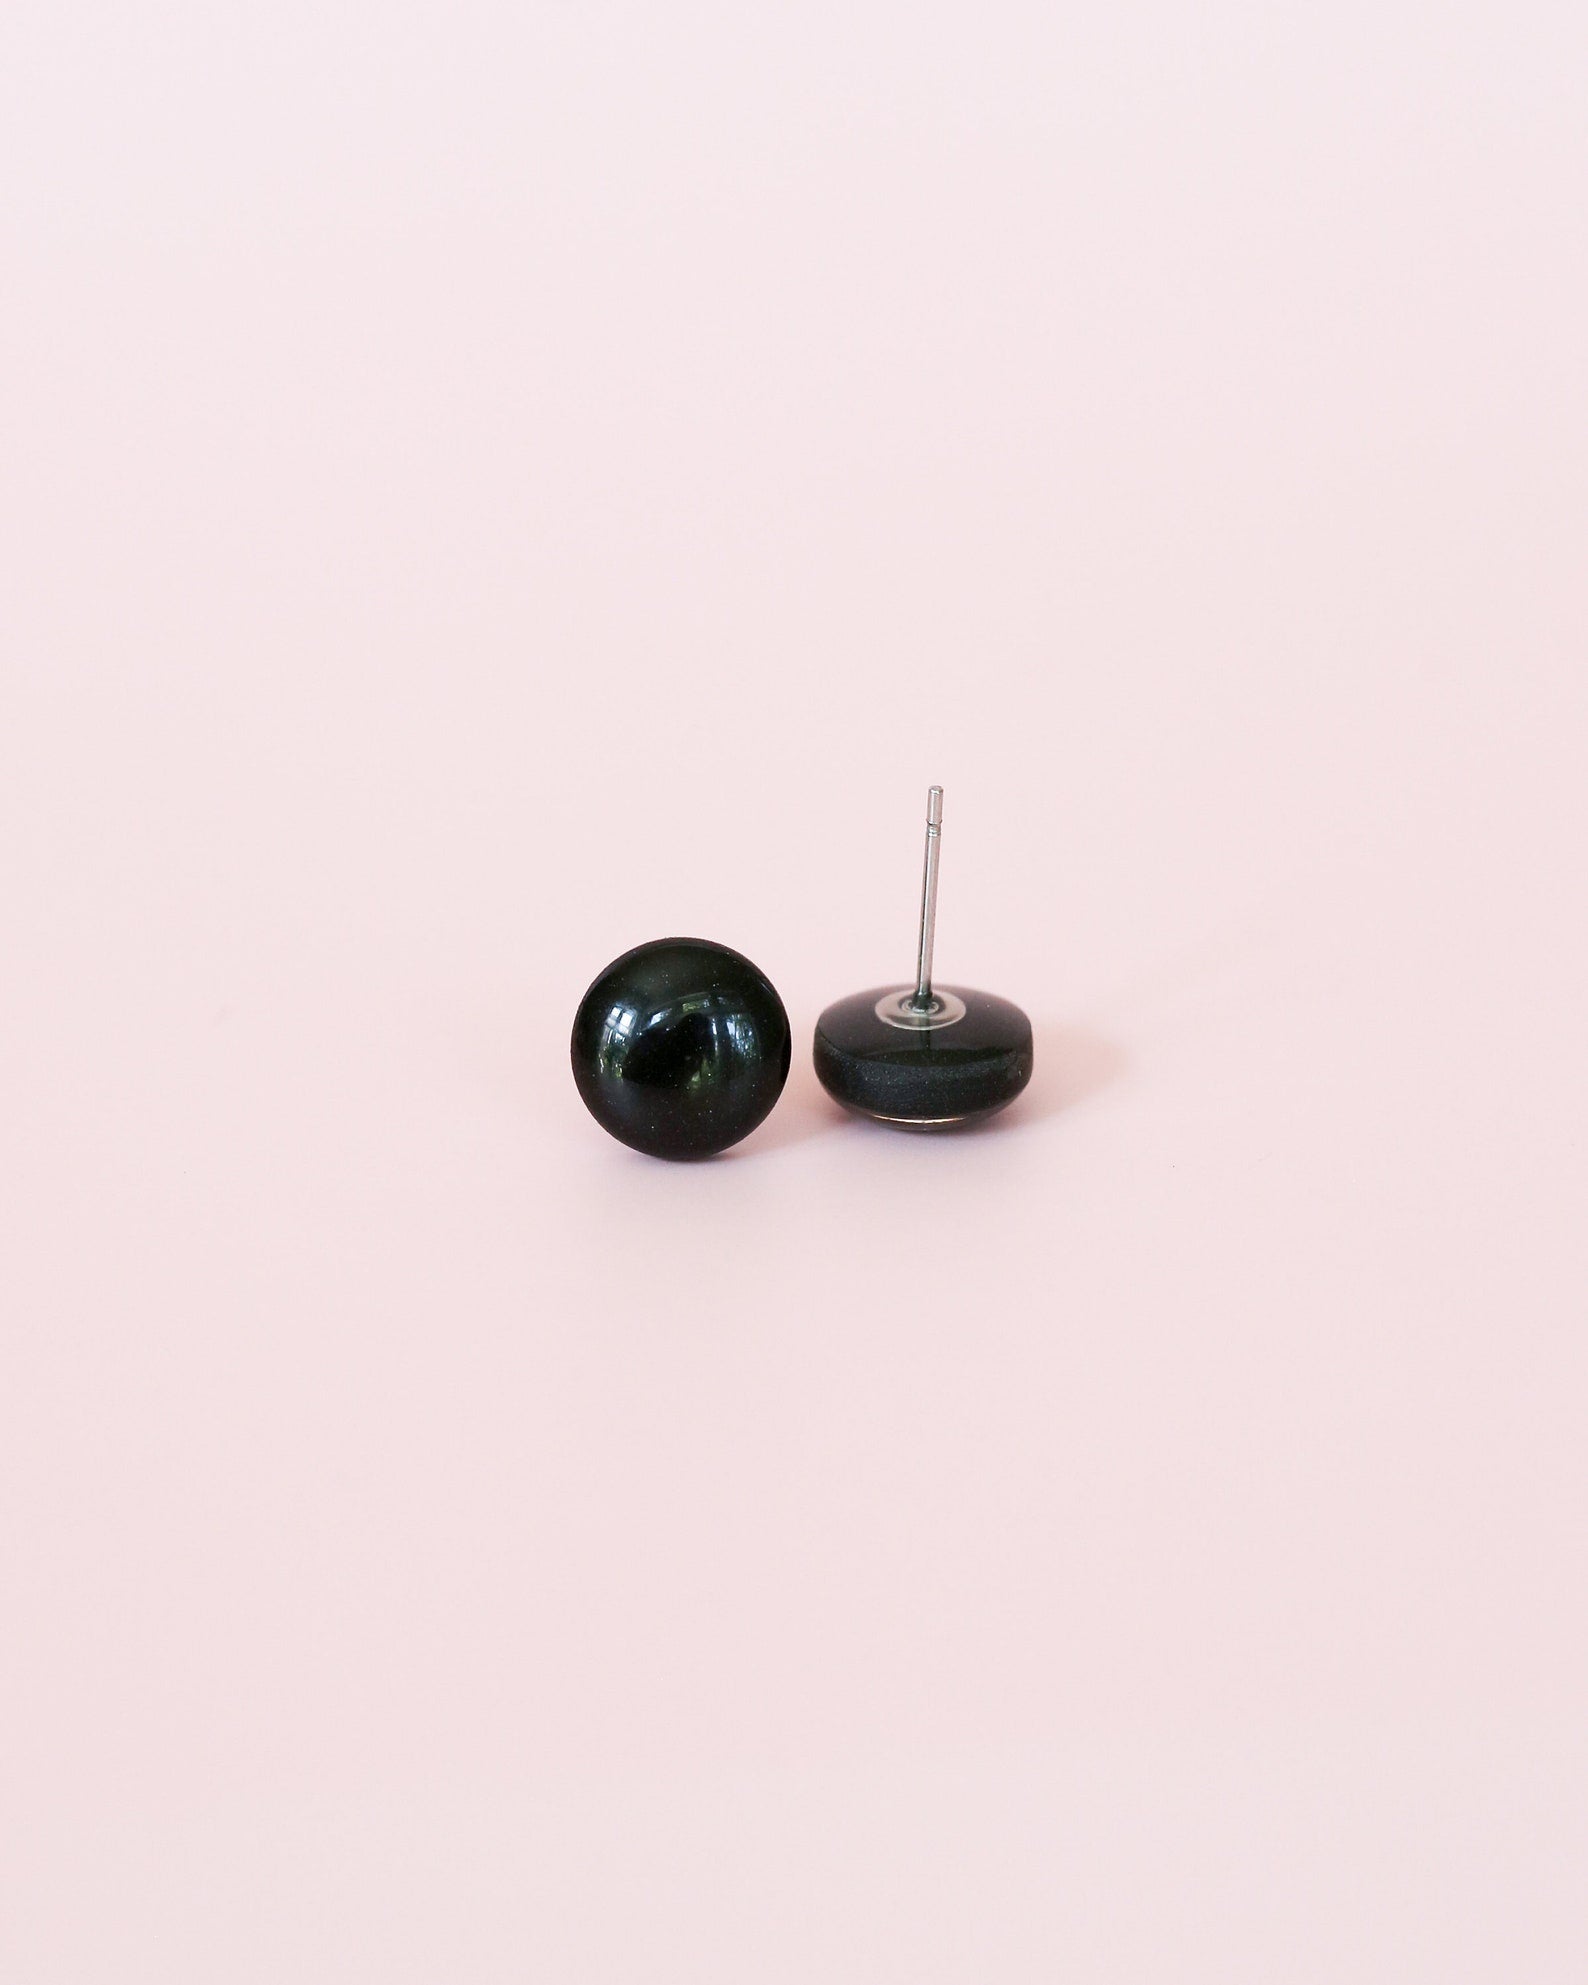 Simple black round studs for sensitive ears